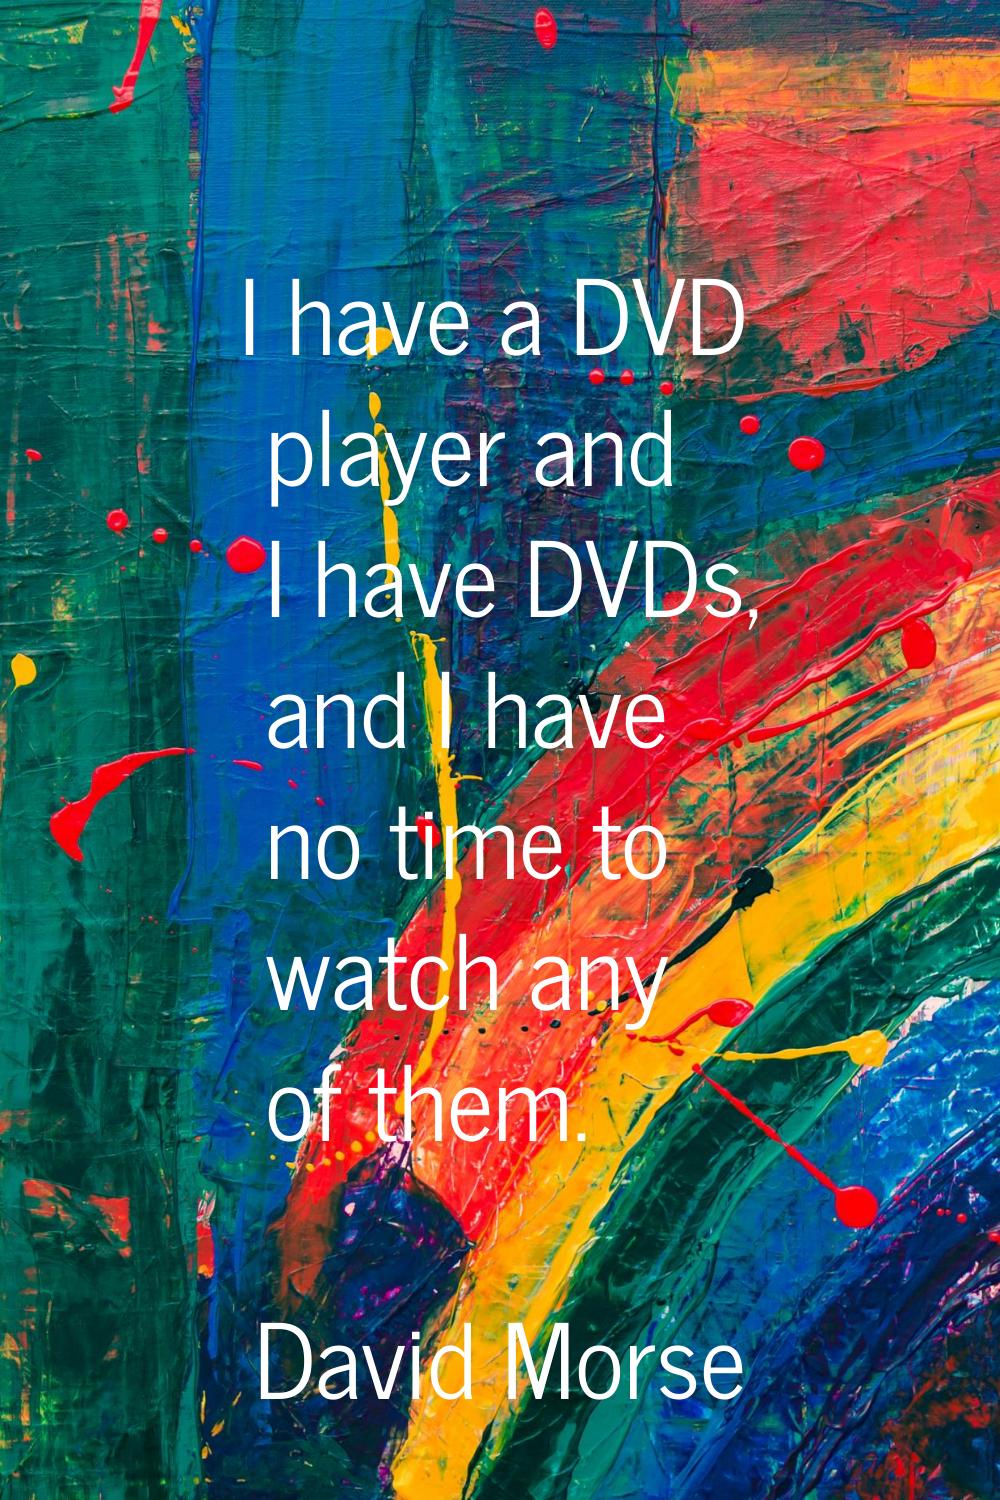 I have a DVD player and I have DVDs, and I have no time to watch any of them.